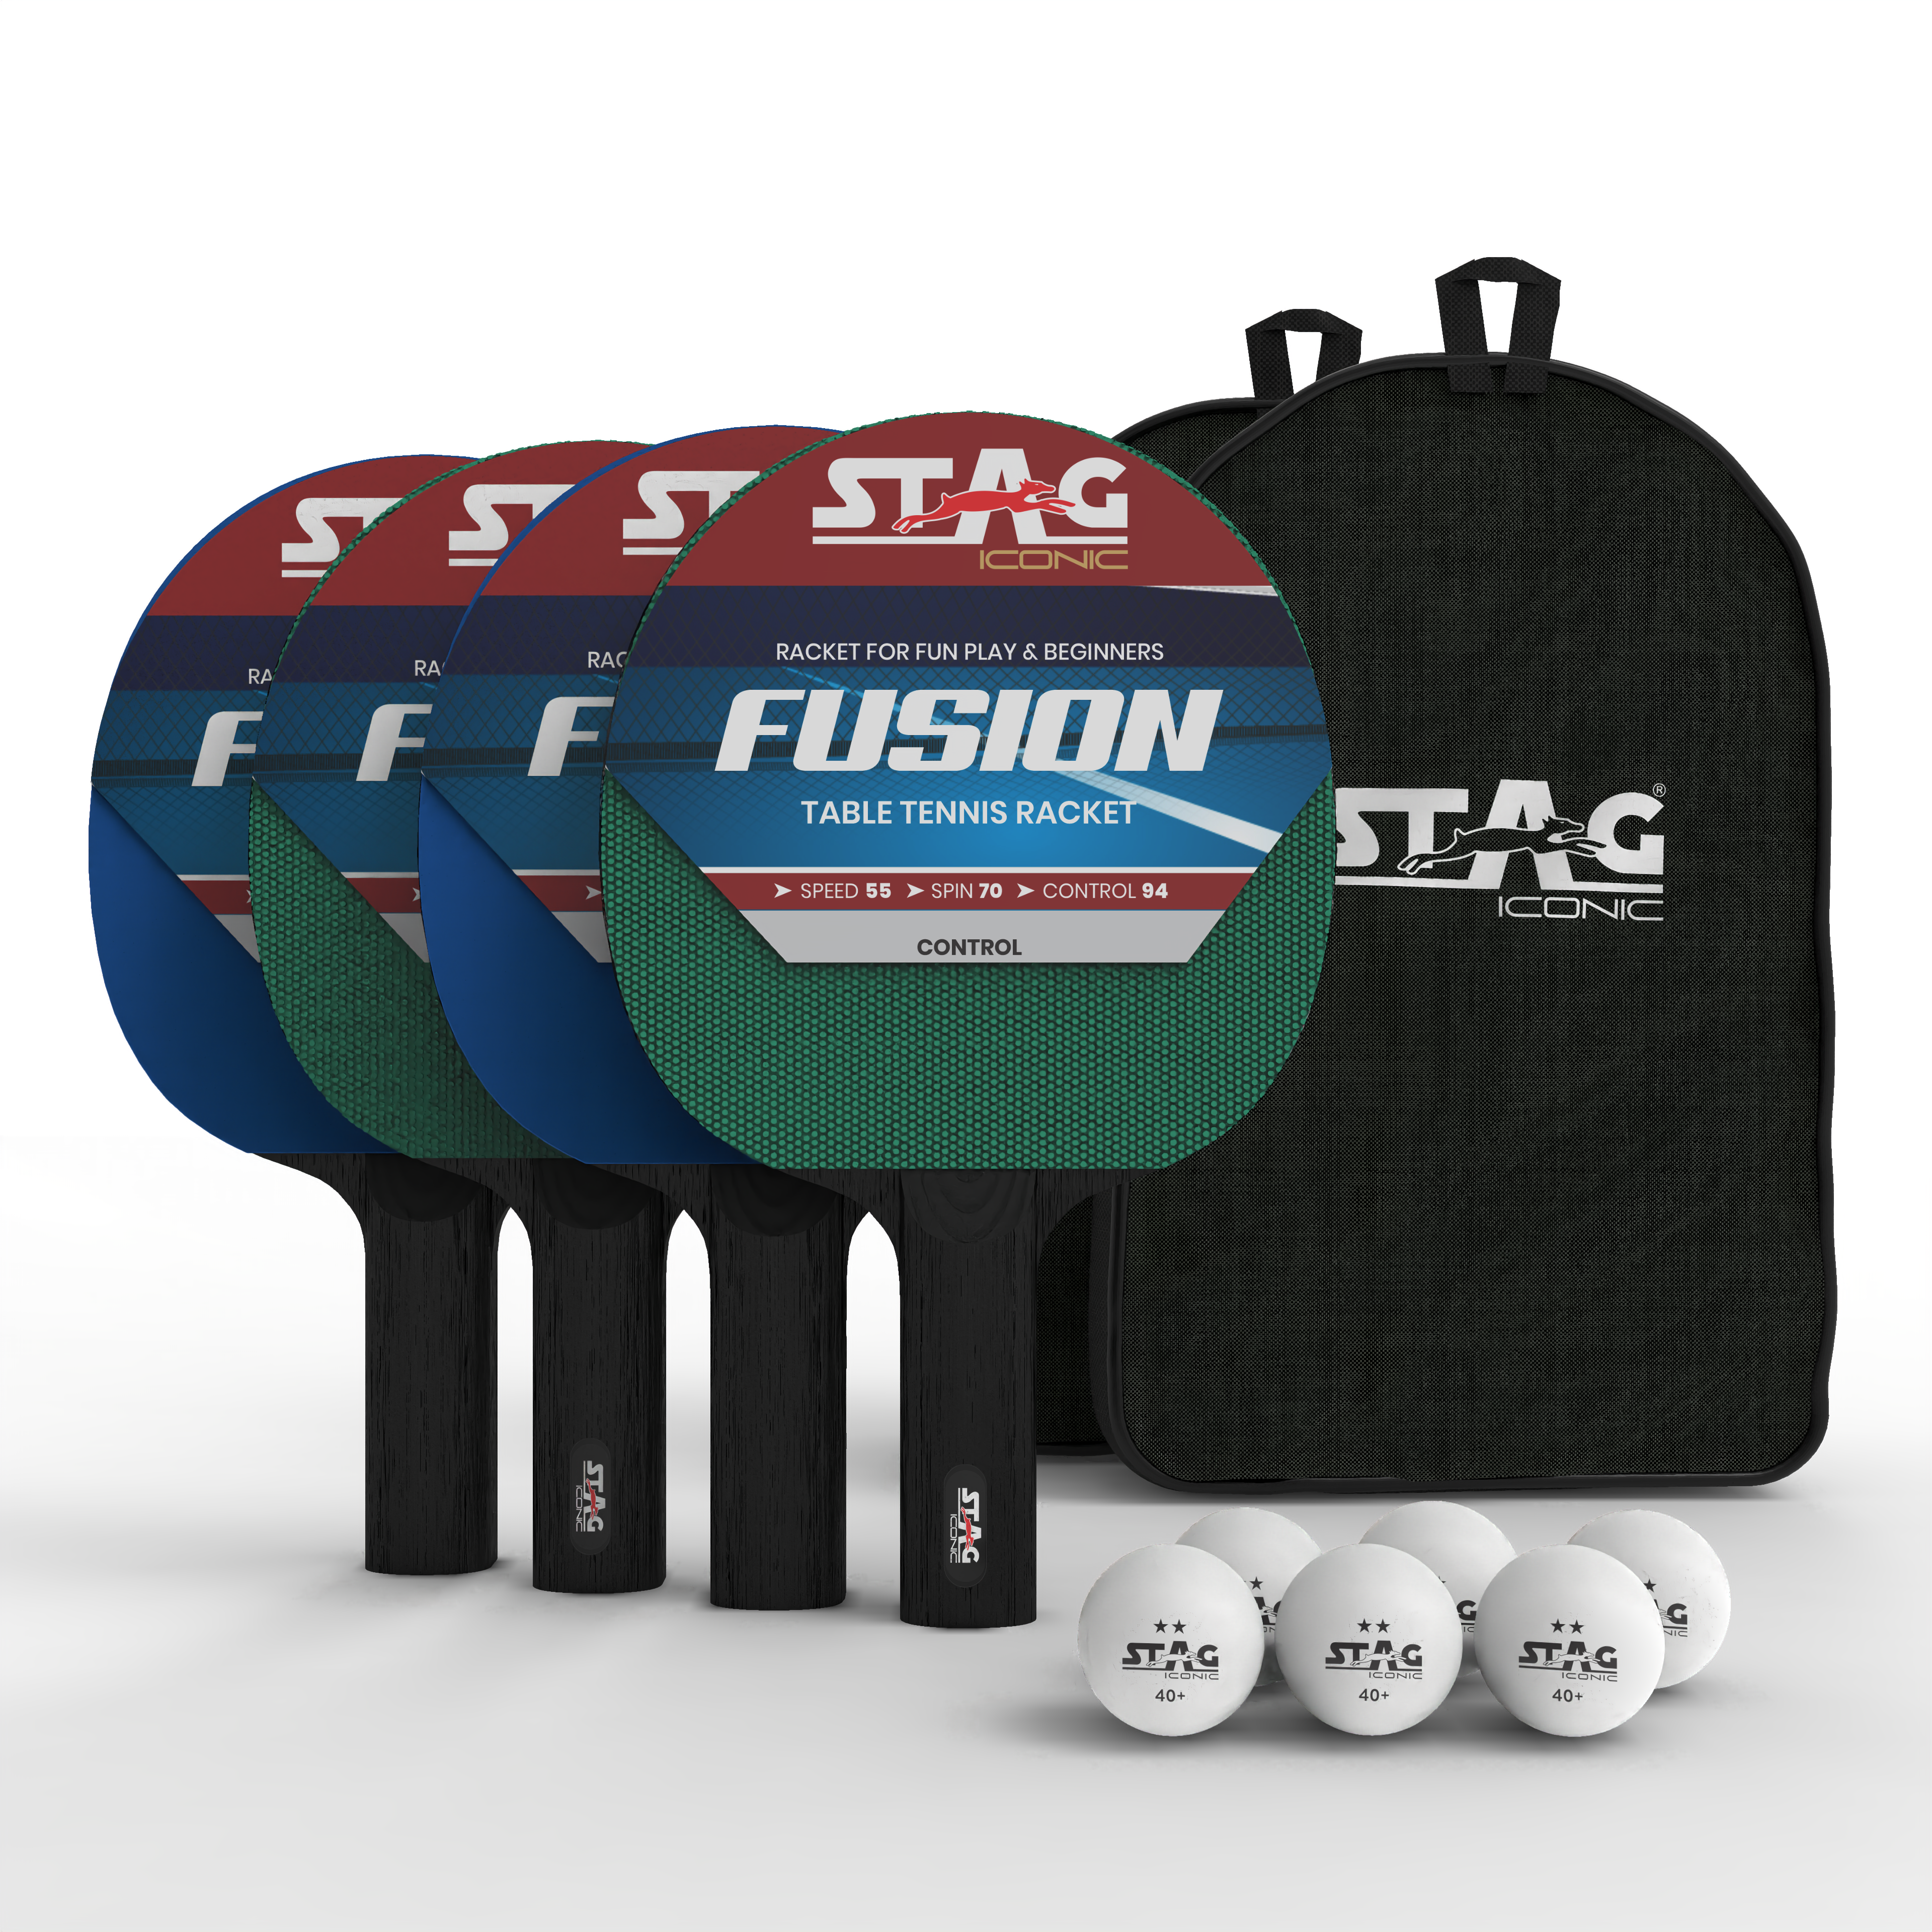 Stag Iconic New 2024 Fusion Series Table Tennis |Beginner Play Series | Spring into Action with Vibrant, Playful Ping-Pop Colors| Discover Your Element in Table Tennis